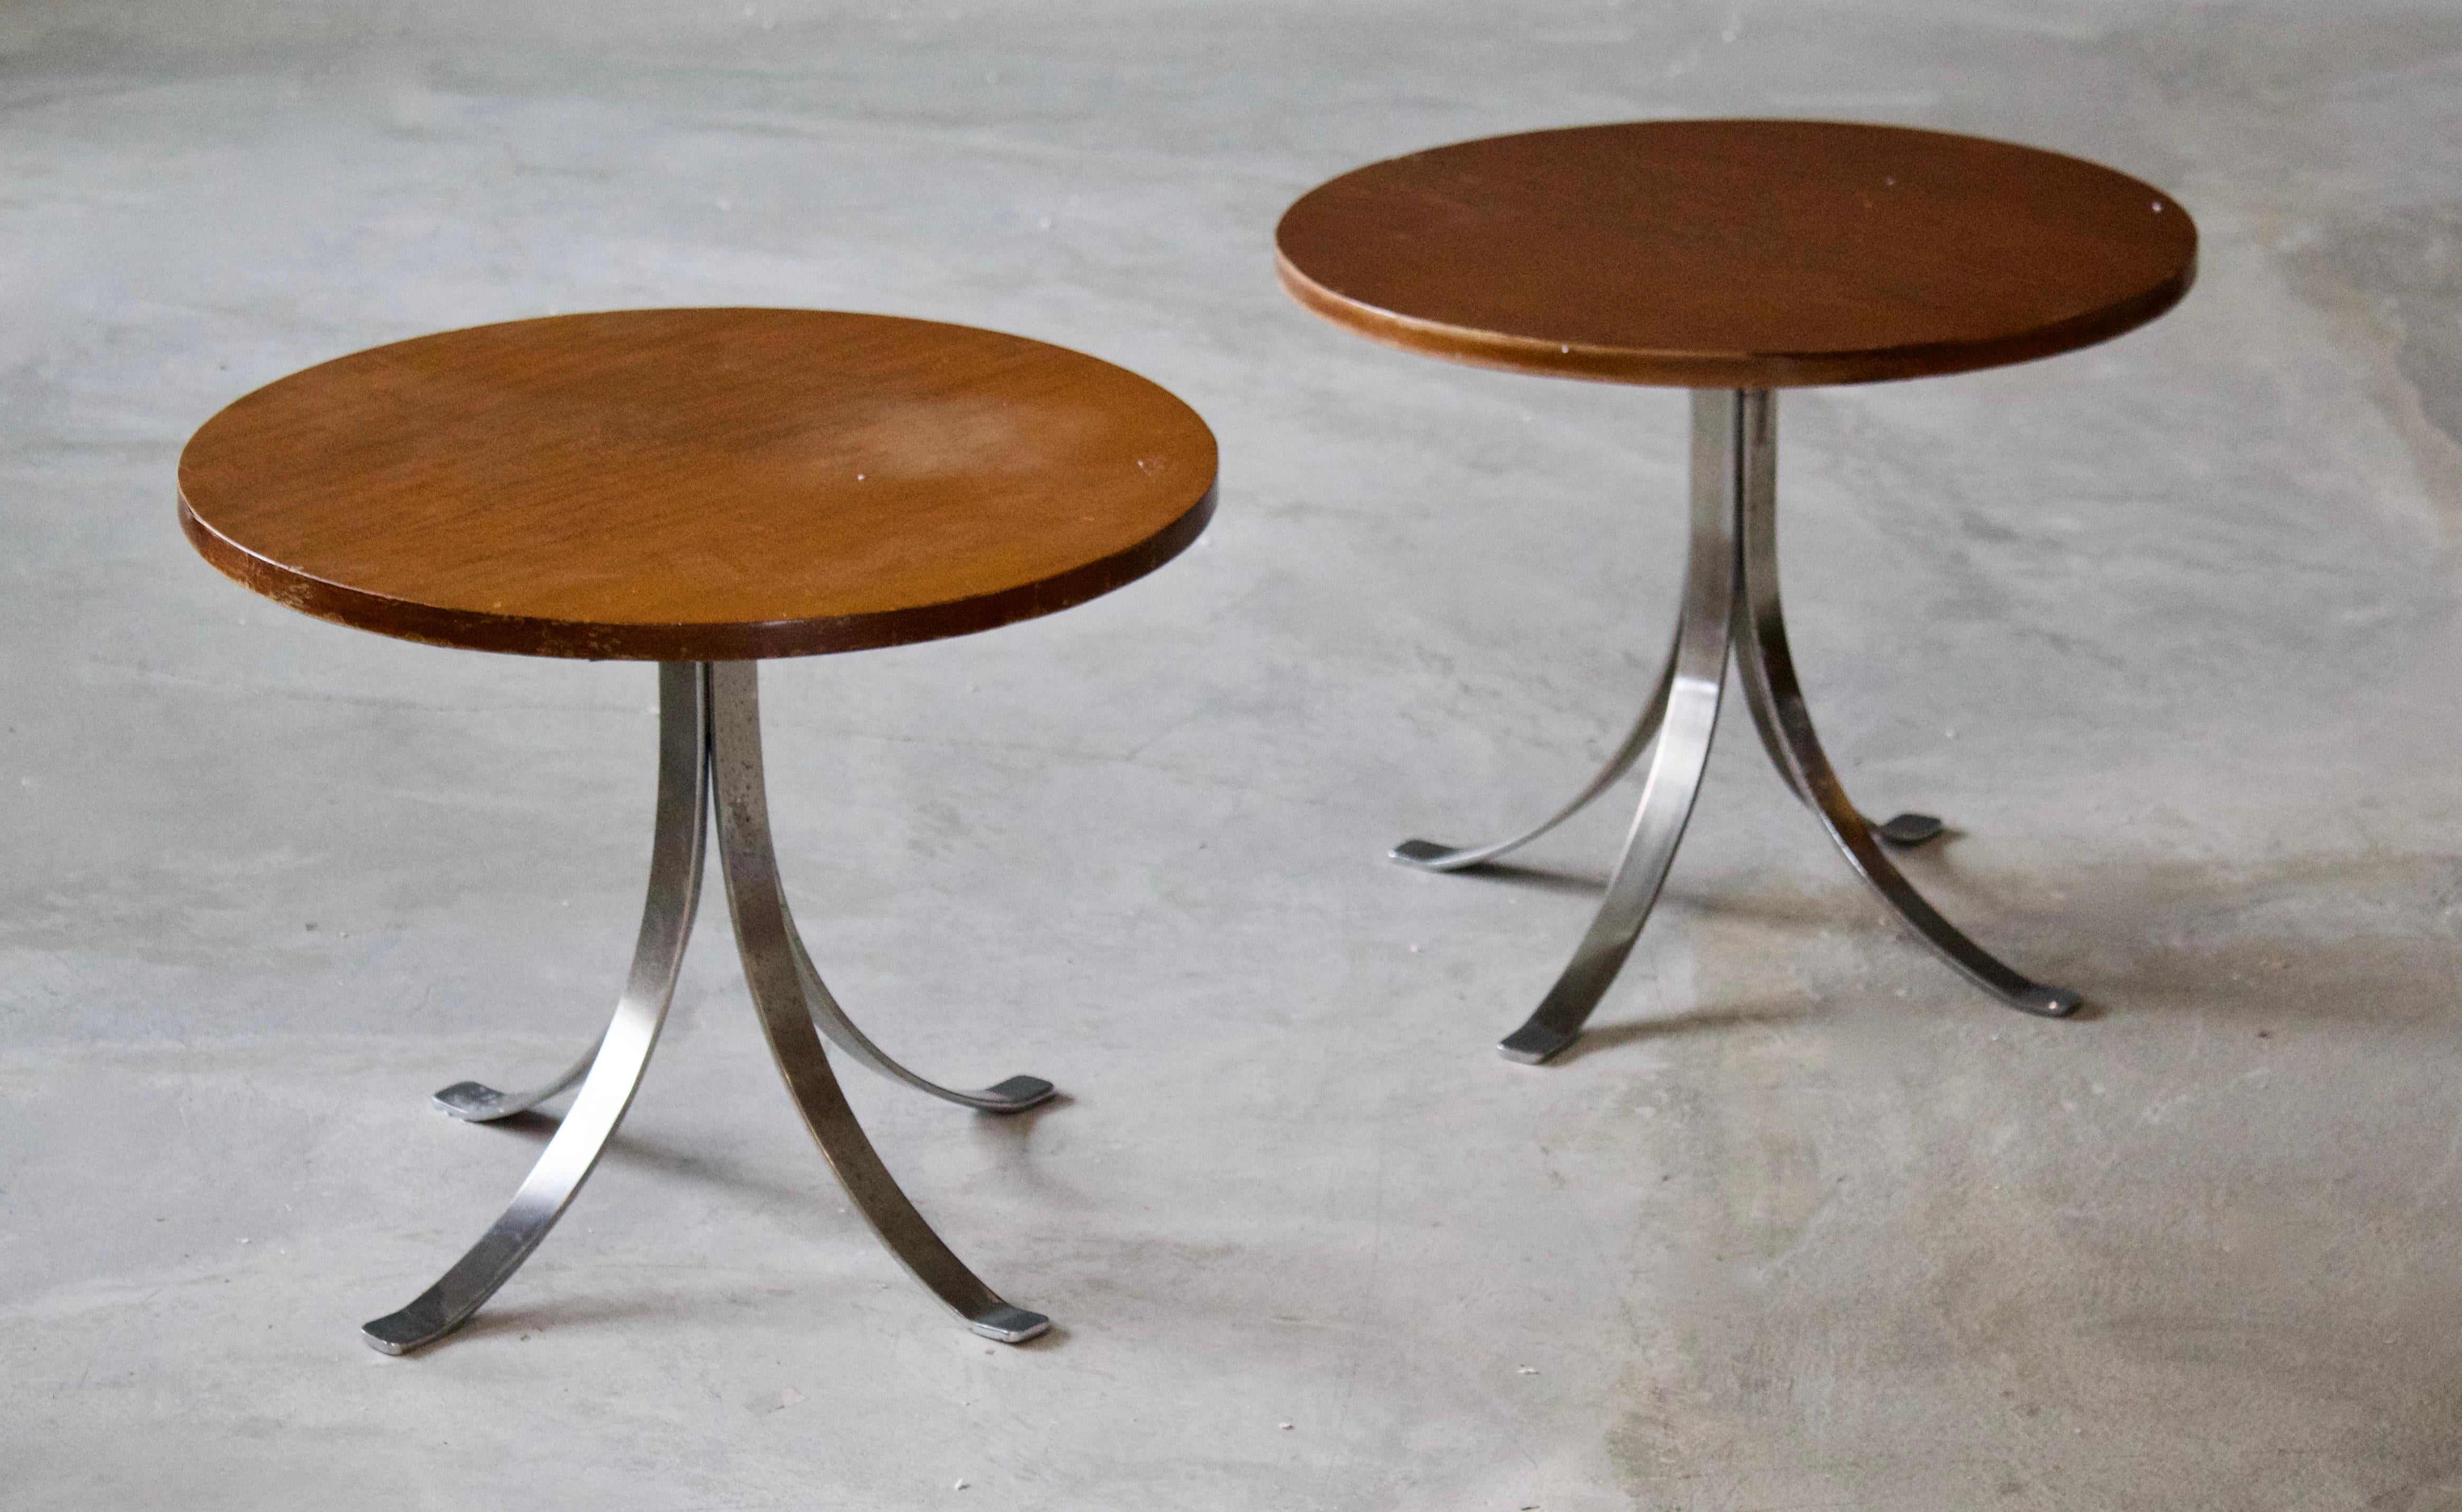 A pair of side tables or coffee tables, design attributed to Gastone Rinaldi, produced by Rinaldis firm RIMA, Italy. With paper labels

 Other Italian designers of the period include Gio Ponti, Franco Albini, Paolo Buffa, Ico Parisi, and Osvaldo